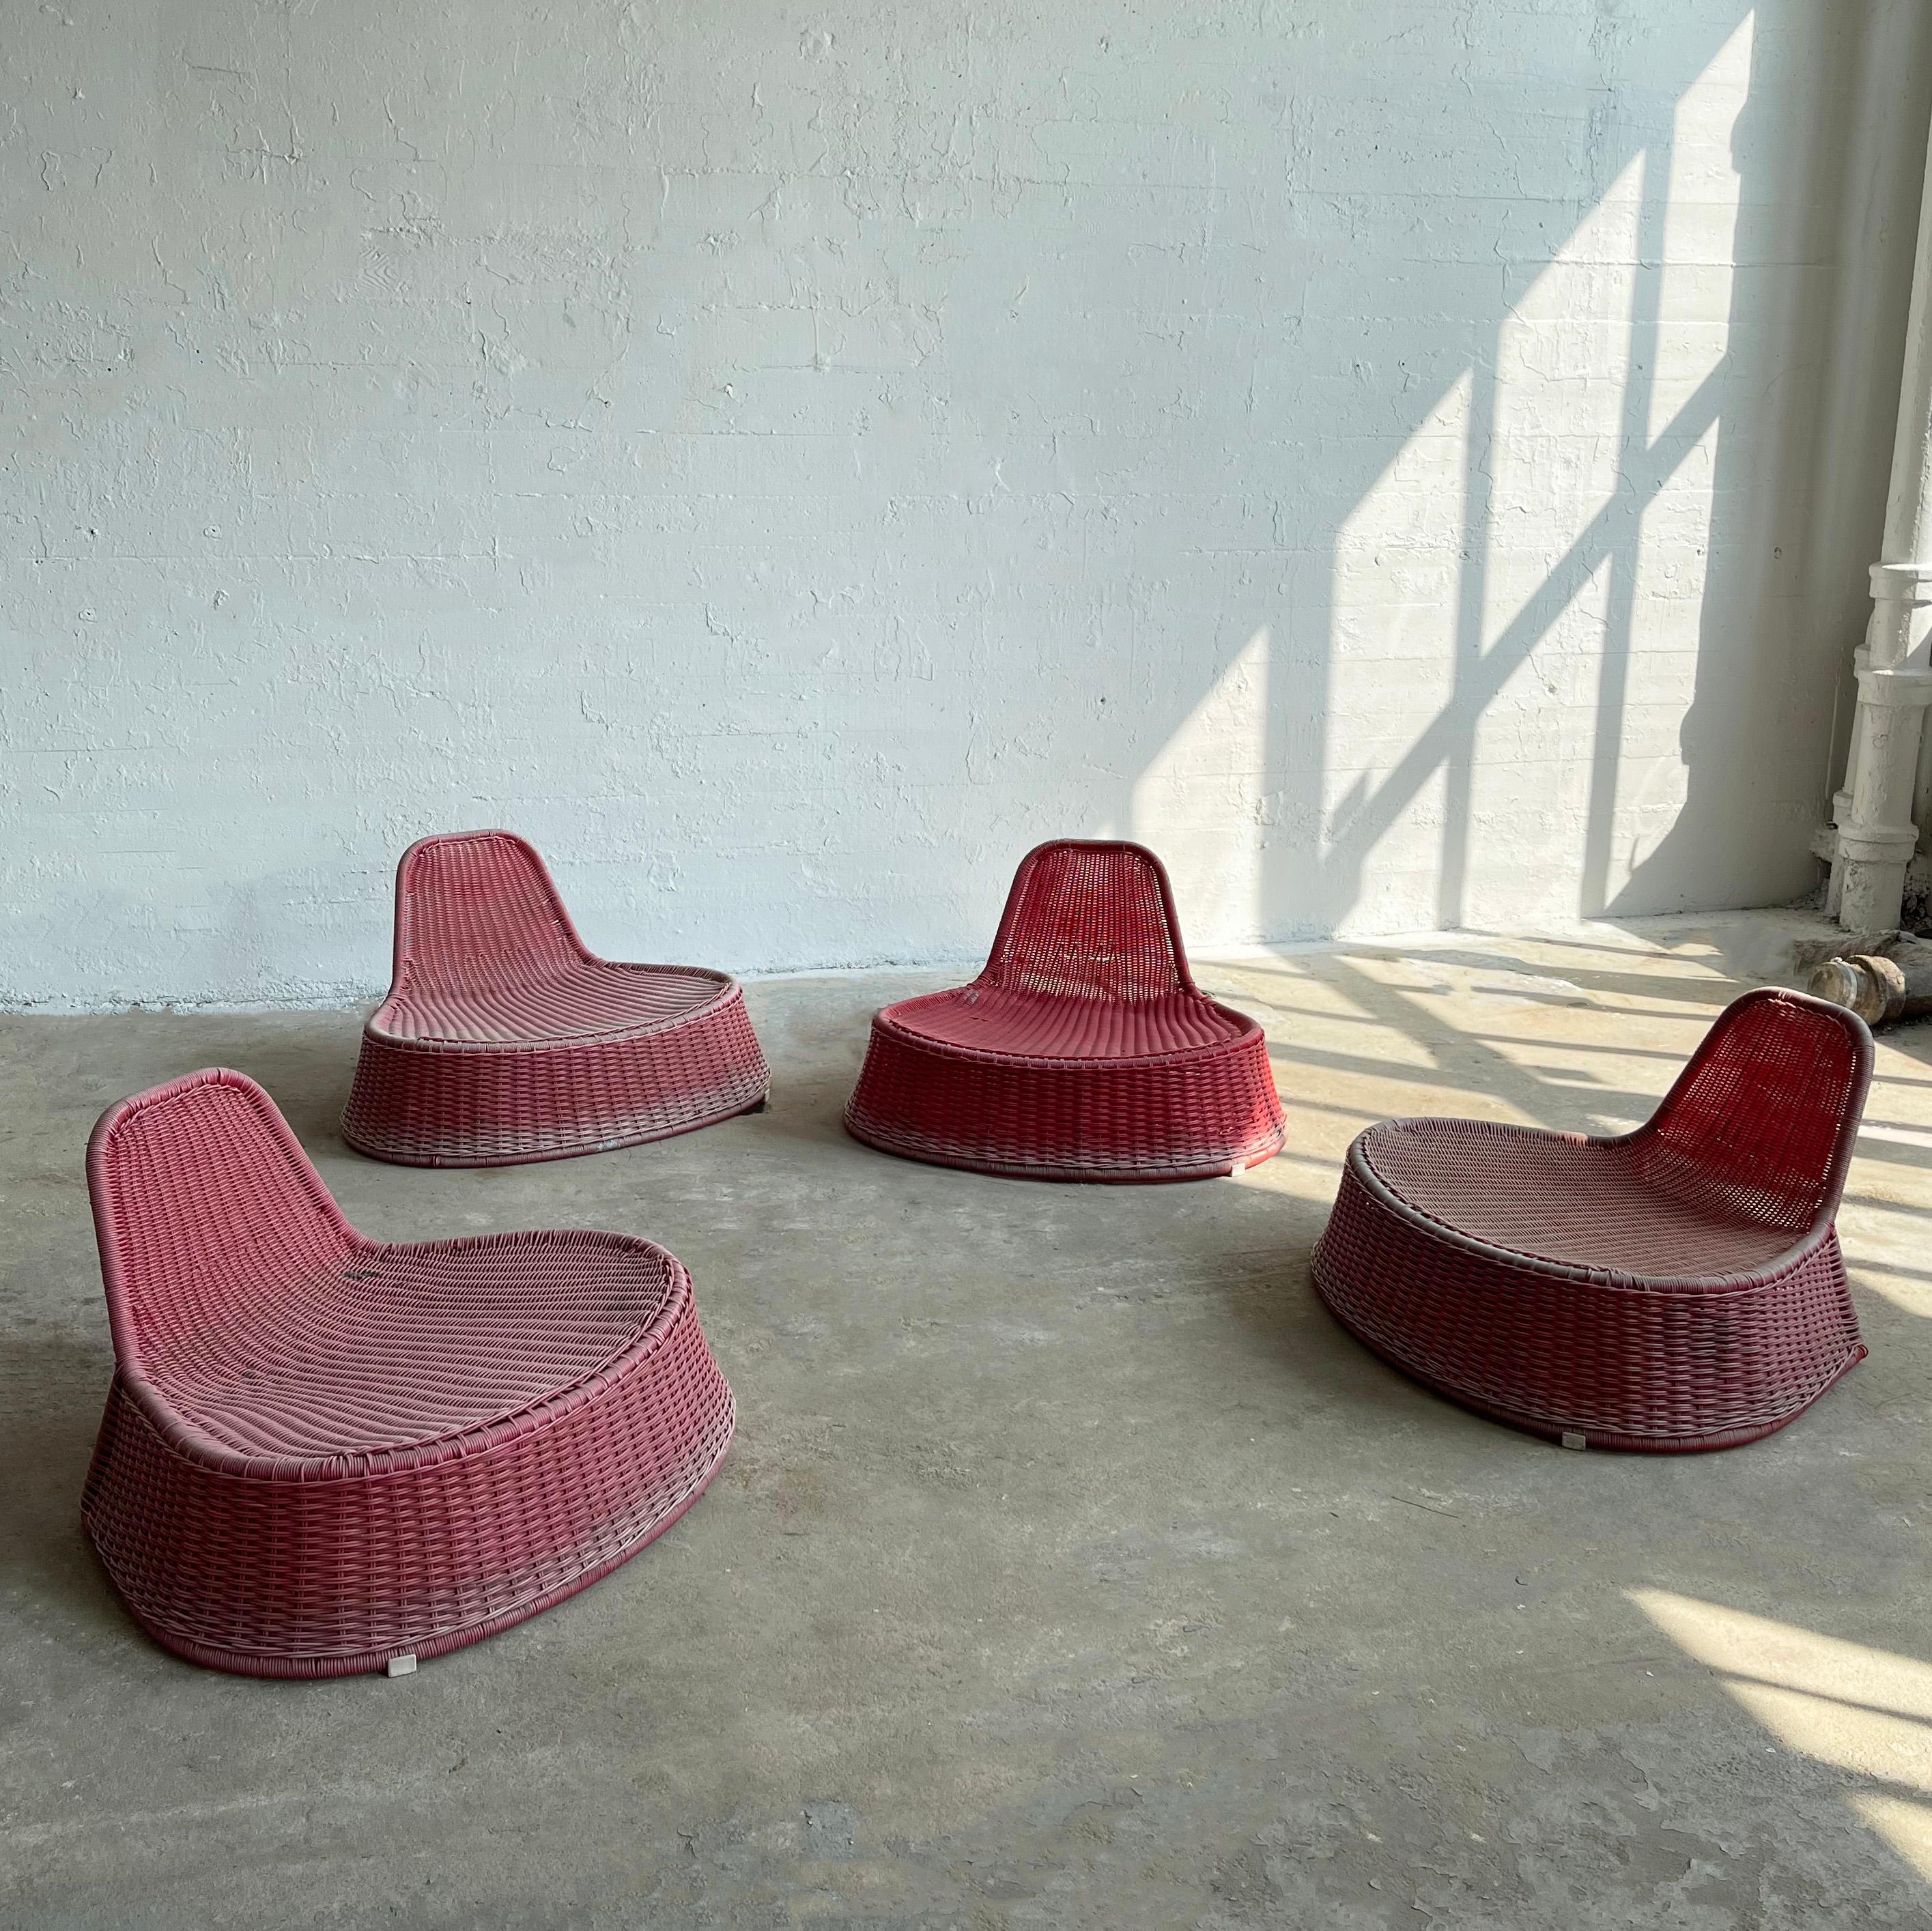 Set of four, colorful, modern, outdoor lounge chairs by Dutch designer Monika Mulder for Ikea circa 1990's are fuild, raspberry pink rattan, woven plastic, organic forms that command an interesting and playful presence both indoor and outdoor. The